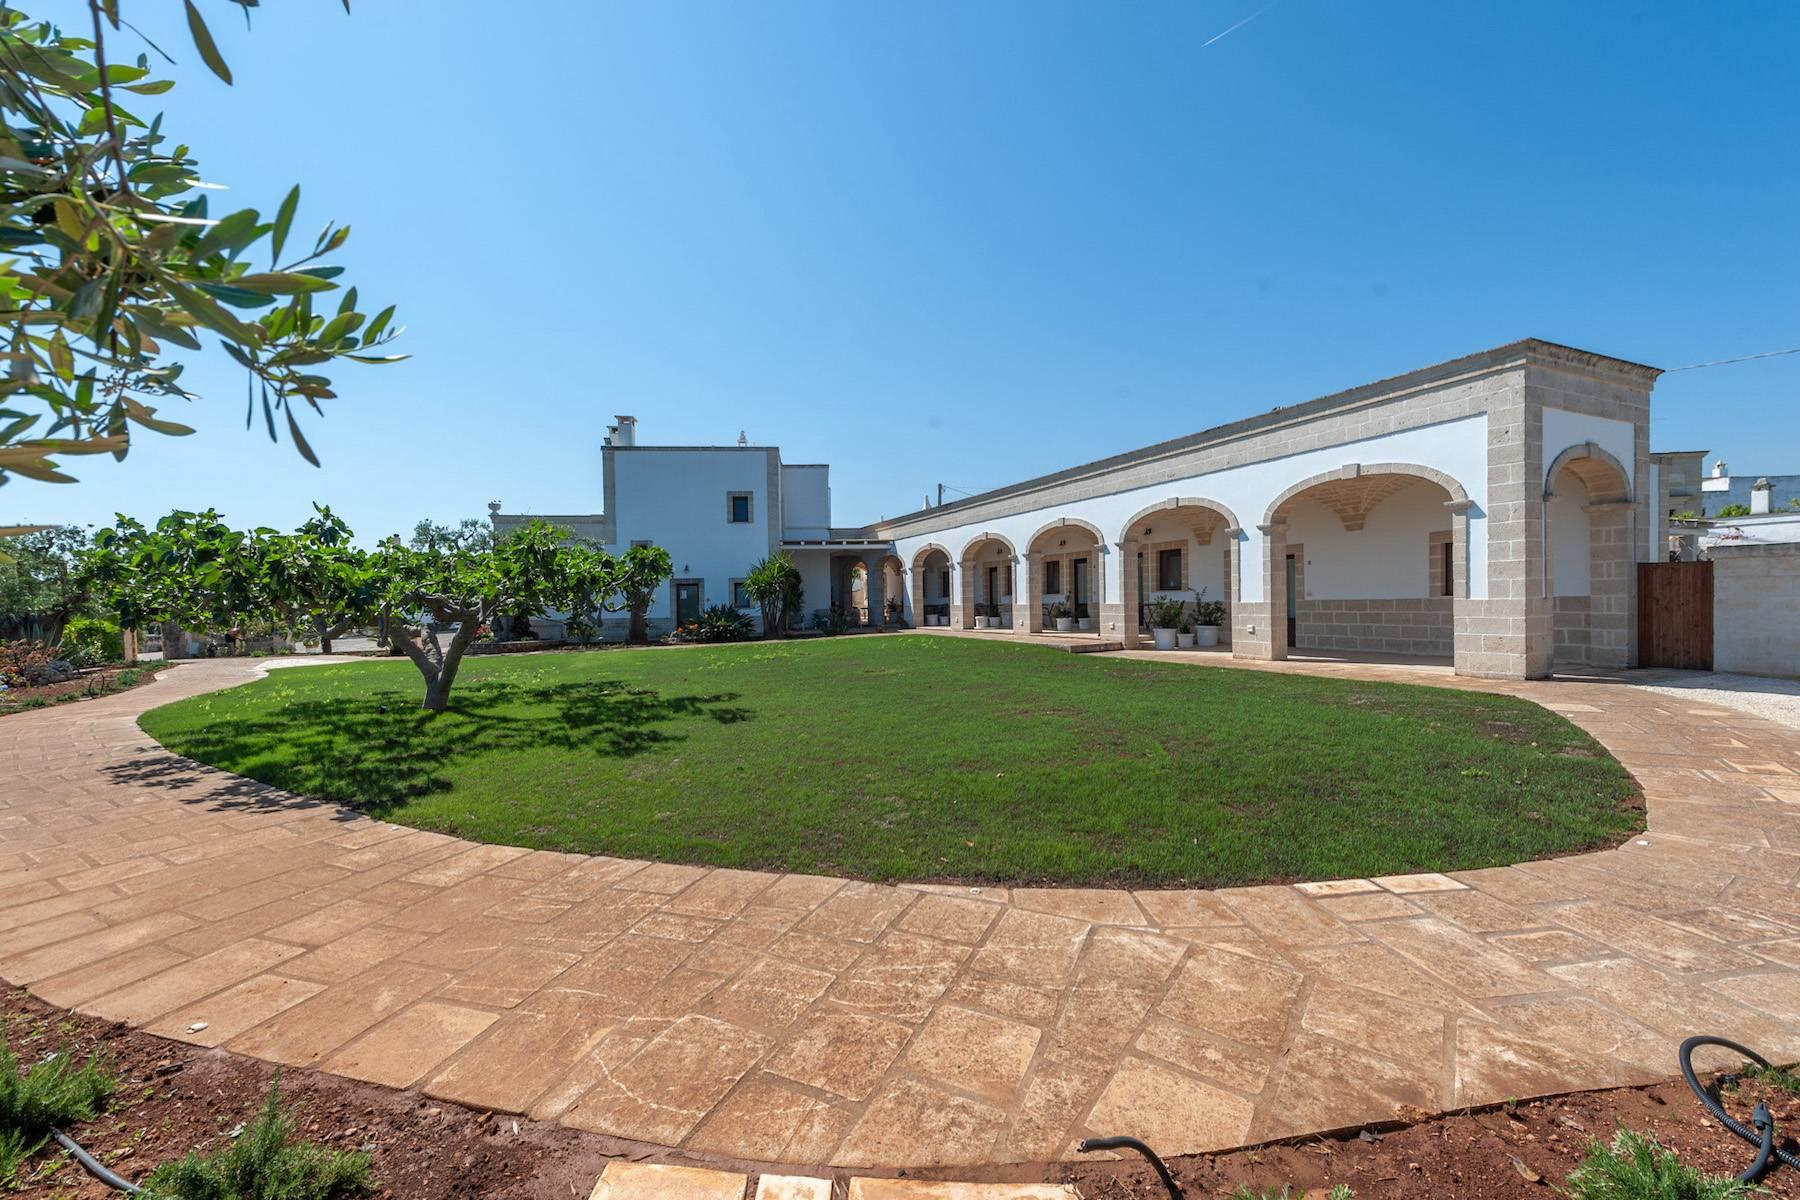 Charming 18th century Masseria surrounded by centuries-old olive trees - 8